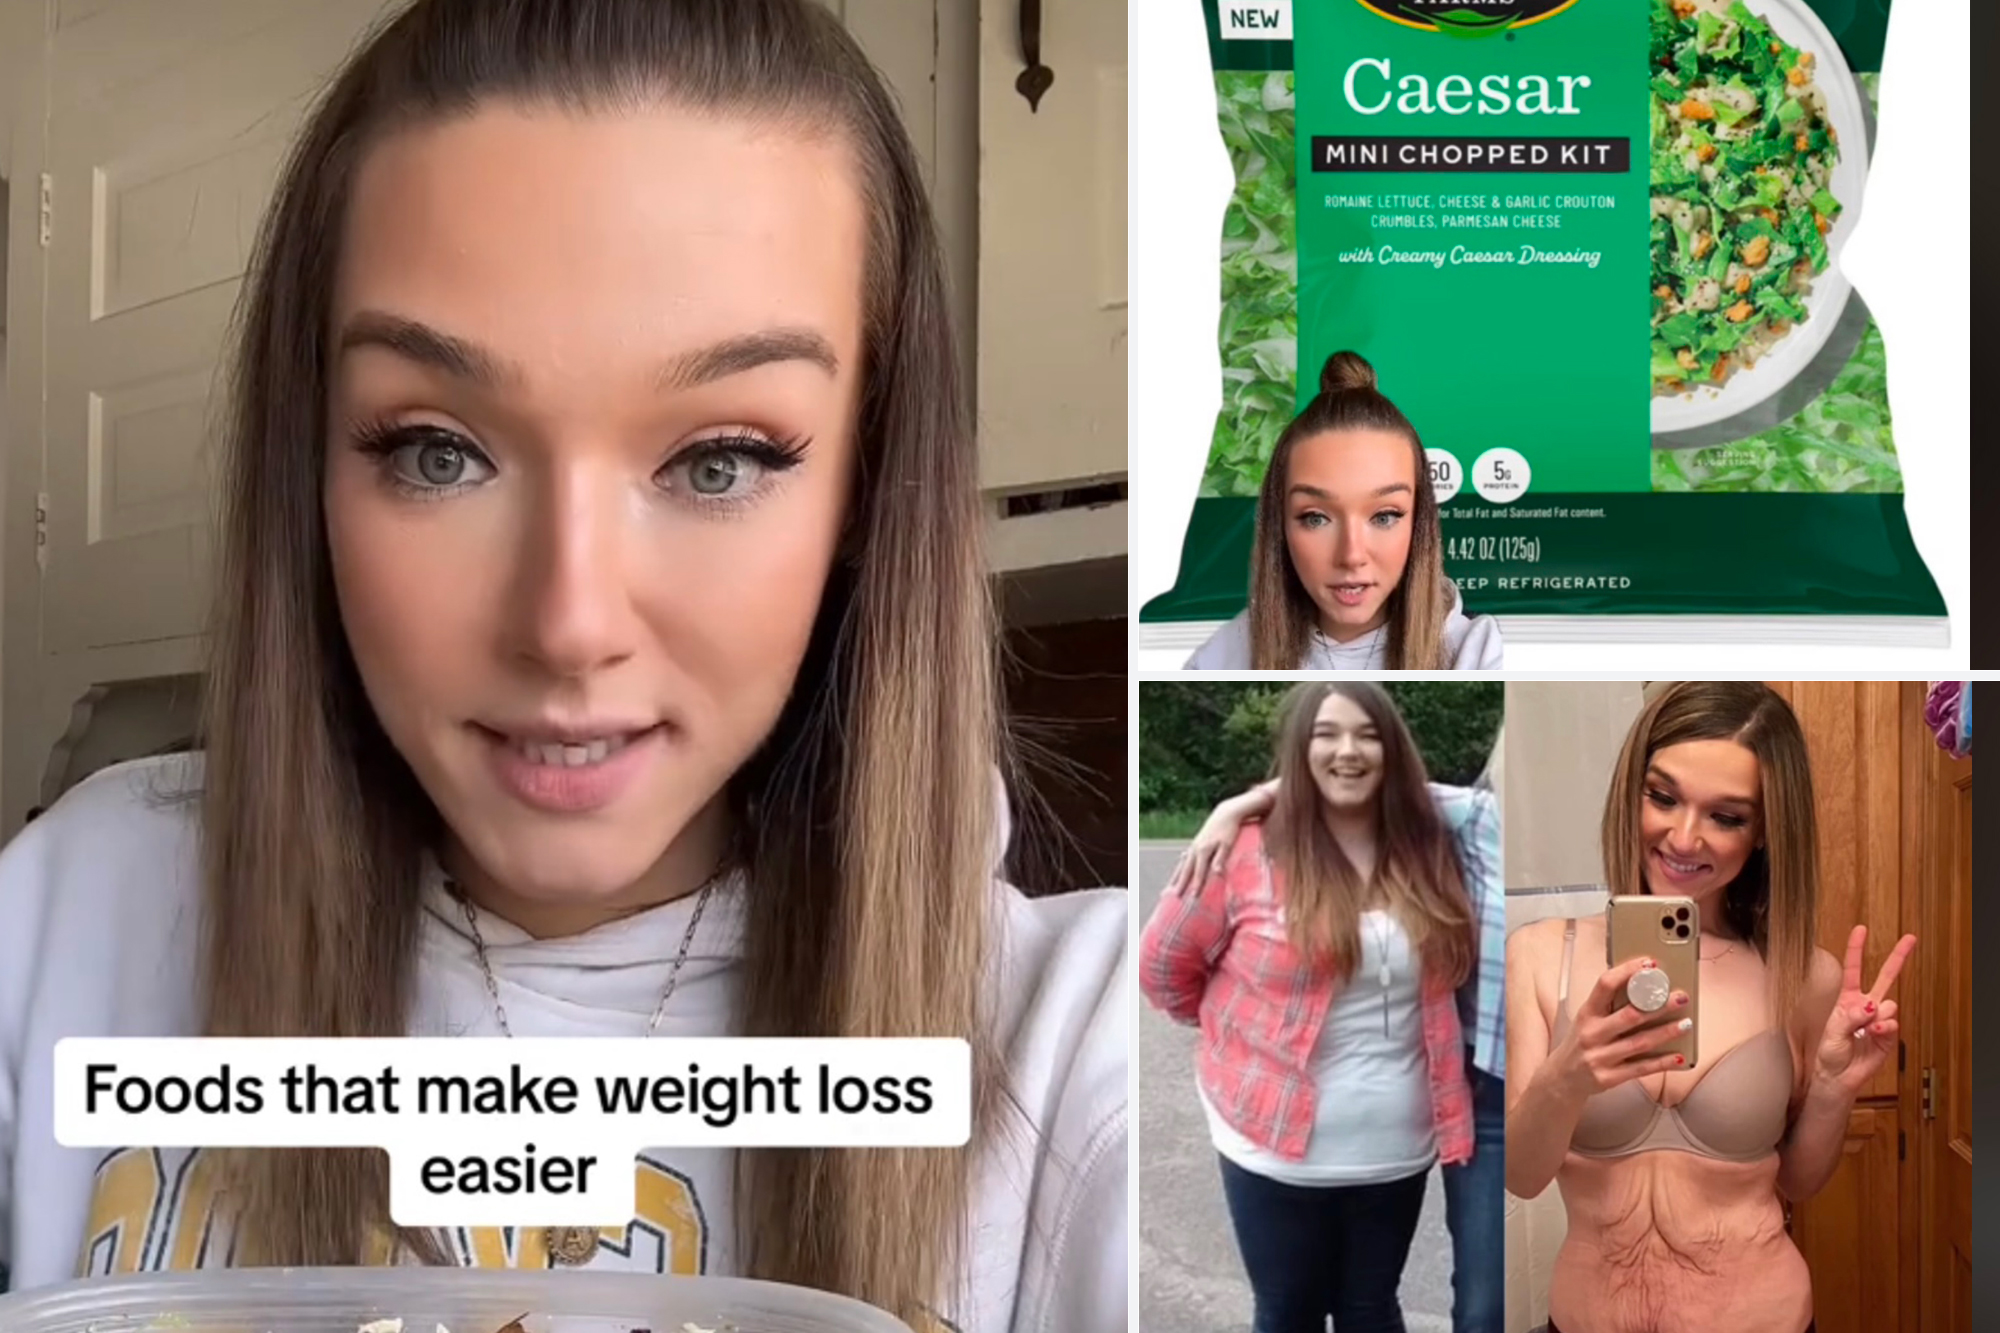 Wisconsin weight loss coach Amber Clemens — who says she shed 160 pounds from 2018 to 2020 and kept it off — is revealing the 11 foods that made her journey easier.